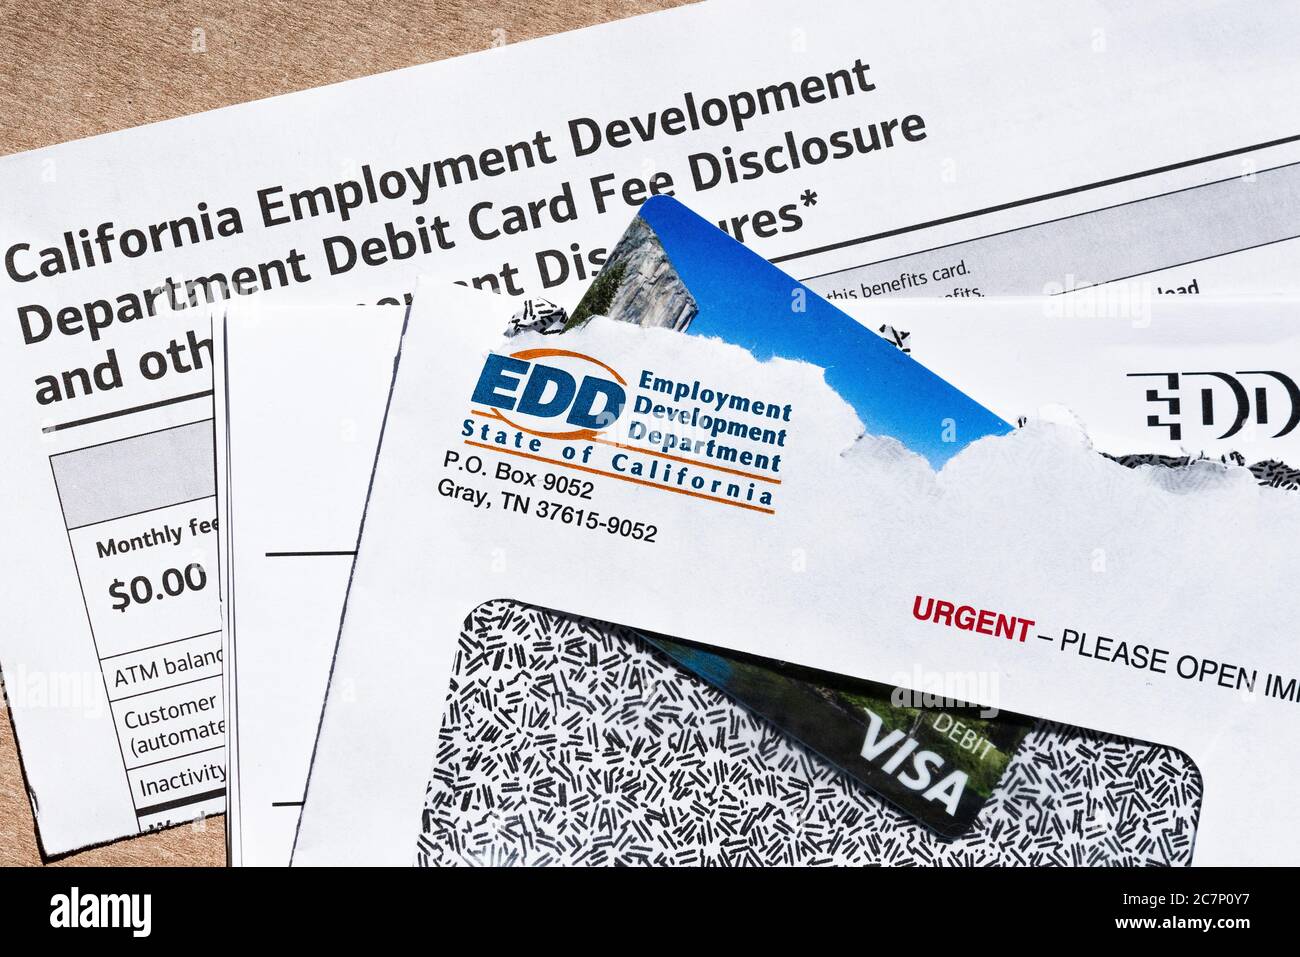 Unemployment Debit Card High Resolution Stock Photography And Images Alamy